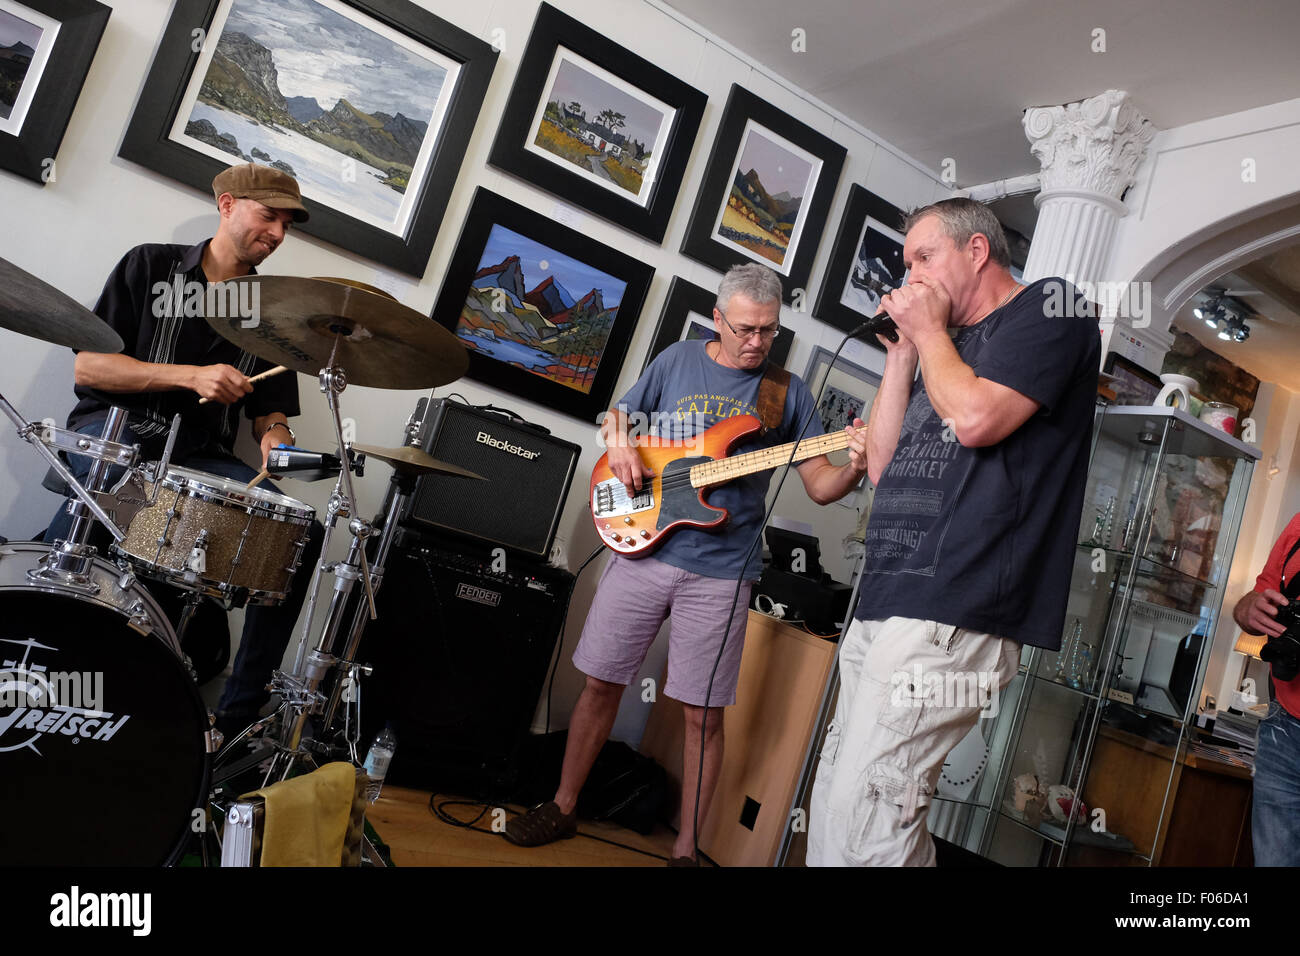 Brecon, Powys, Wales, UK. 8th Aug, 2015. Live music among the art inside the Ardent Gallery in Brecon town centre one of many live music venues during the Brecon fringe festival weekend. Stock Photo